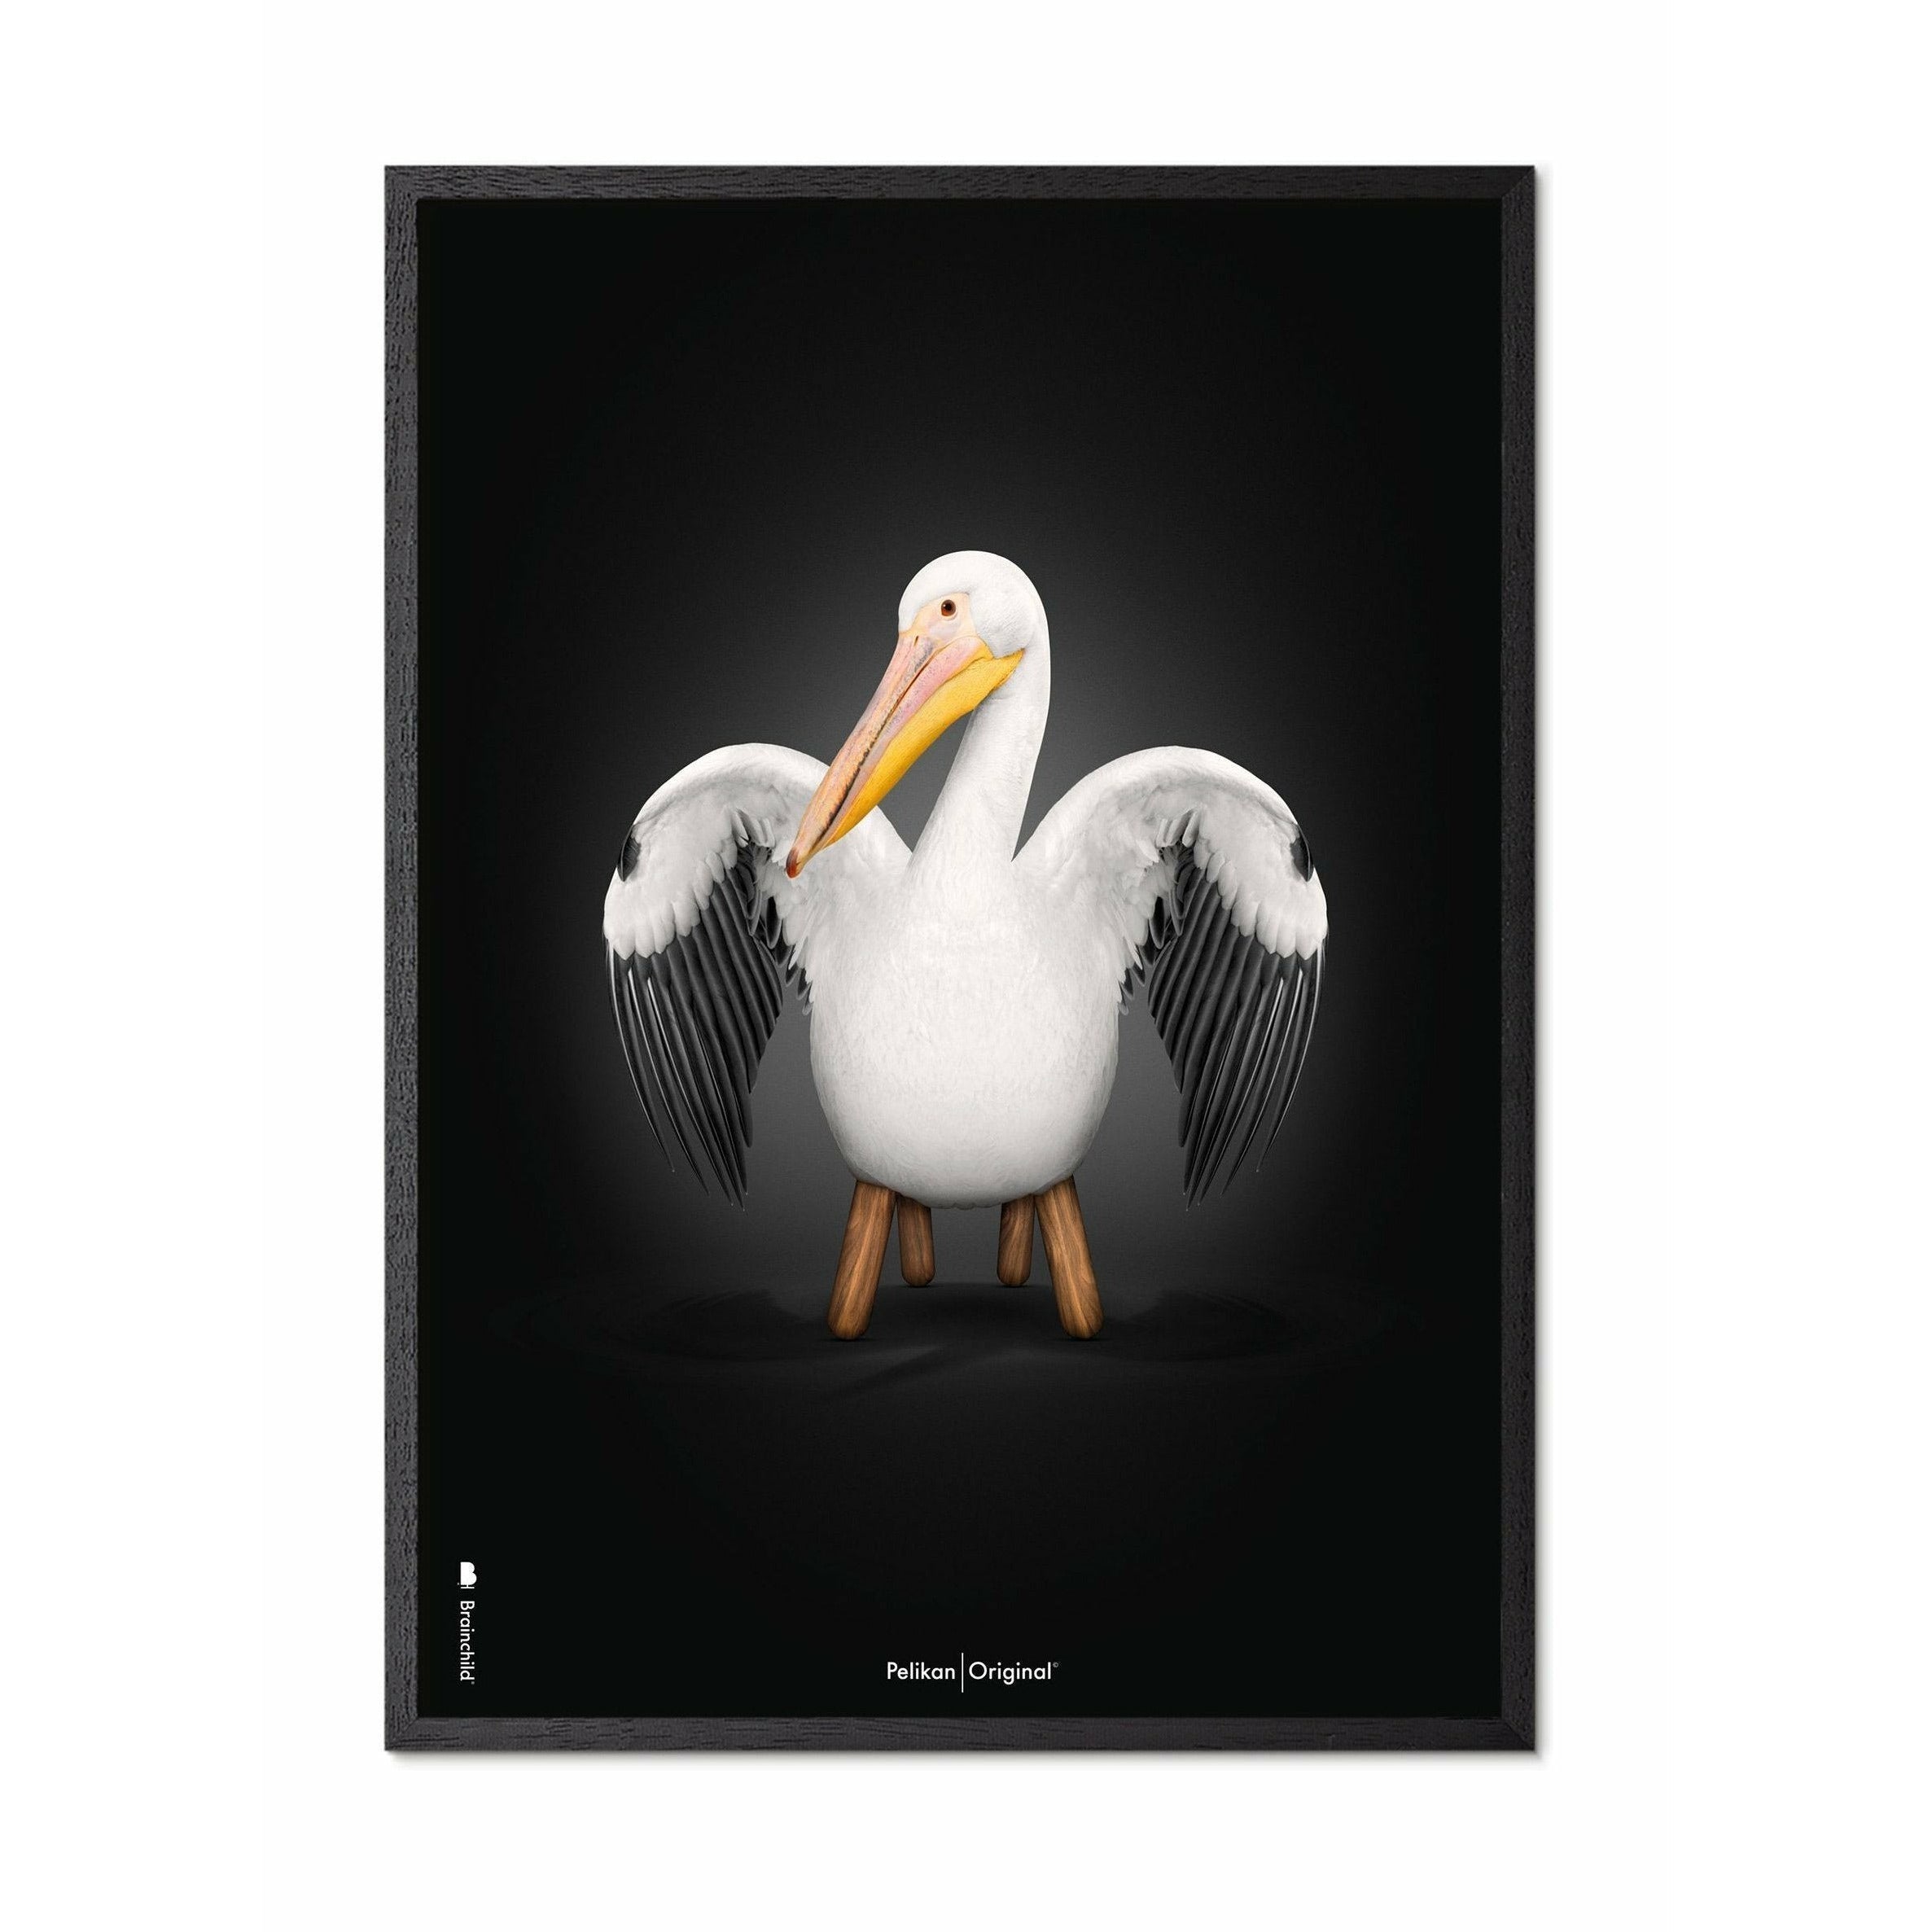 Brainchild Pelikan Classic Poster, Frame In Black Lacquered Wood 50x70 Cm, Black Background